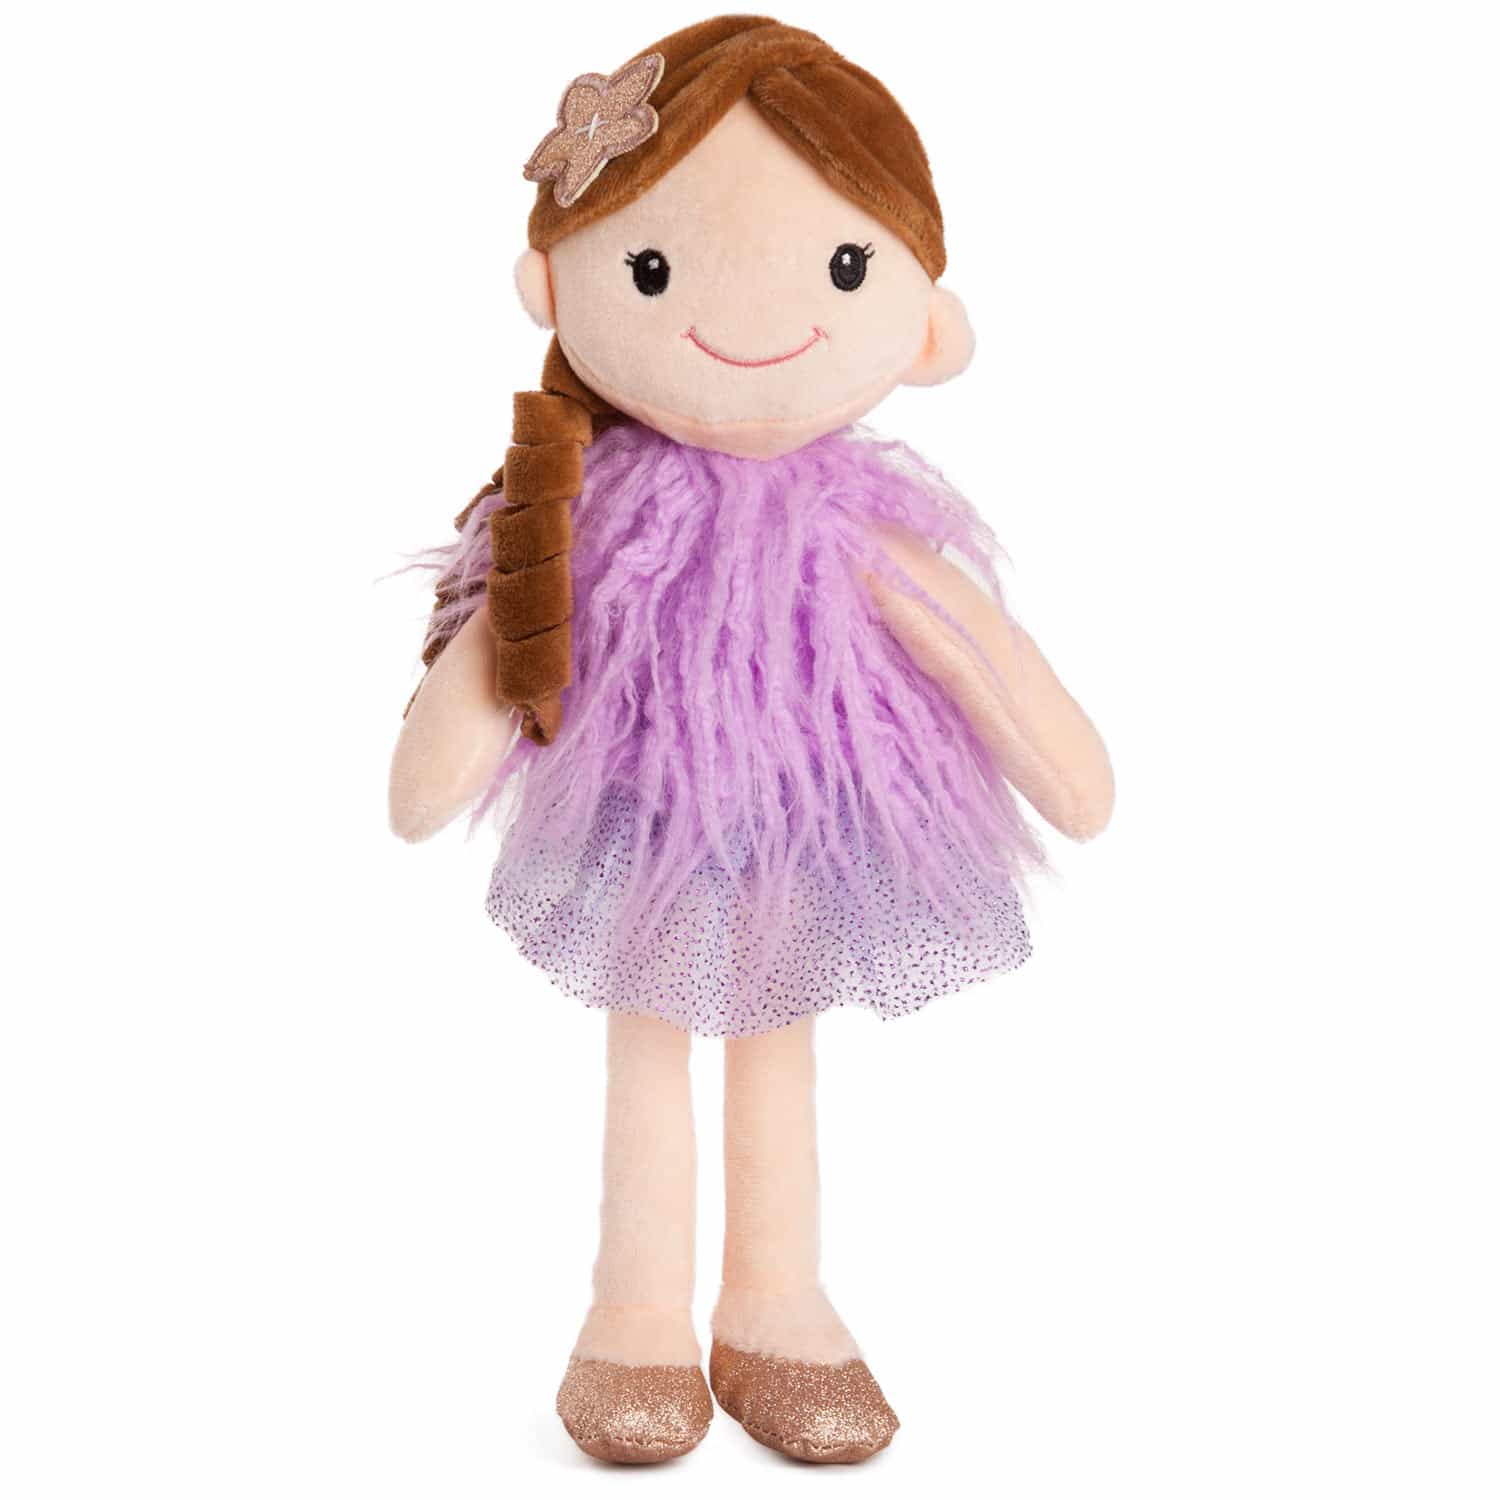 Doll with spectacular clothes - Purple